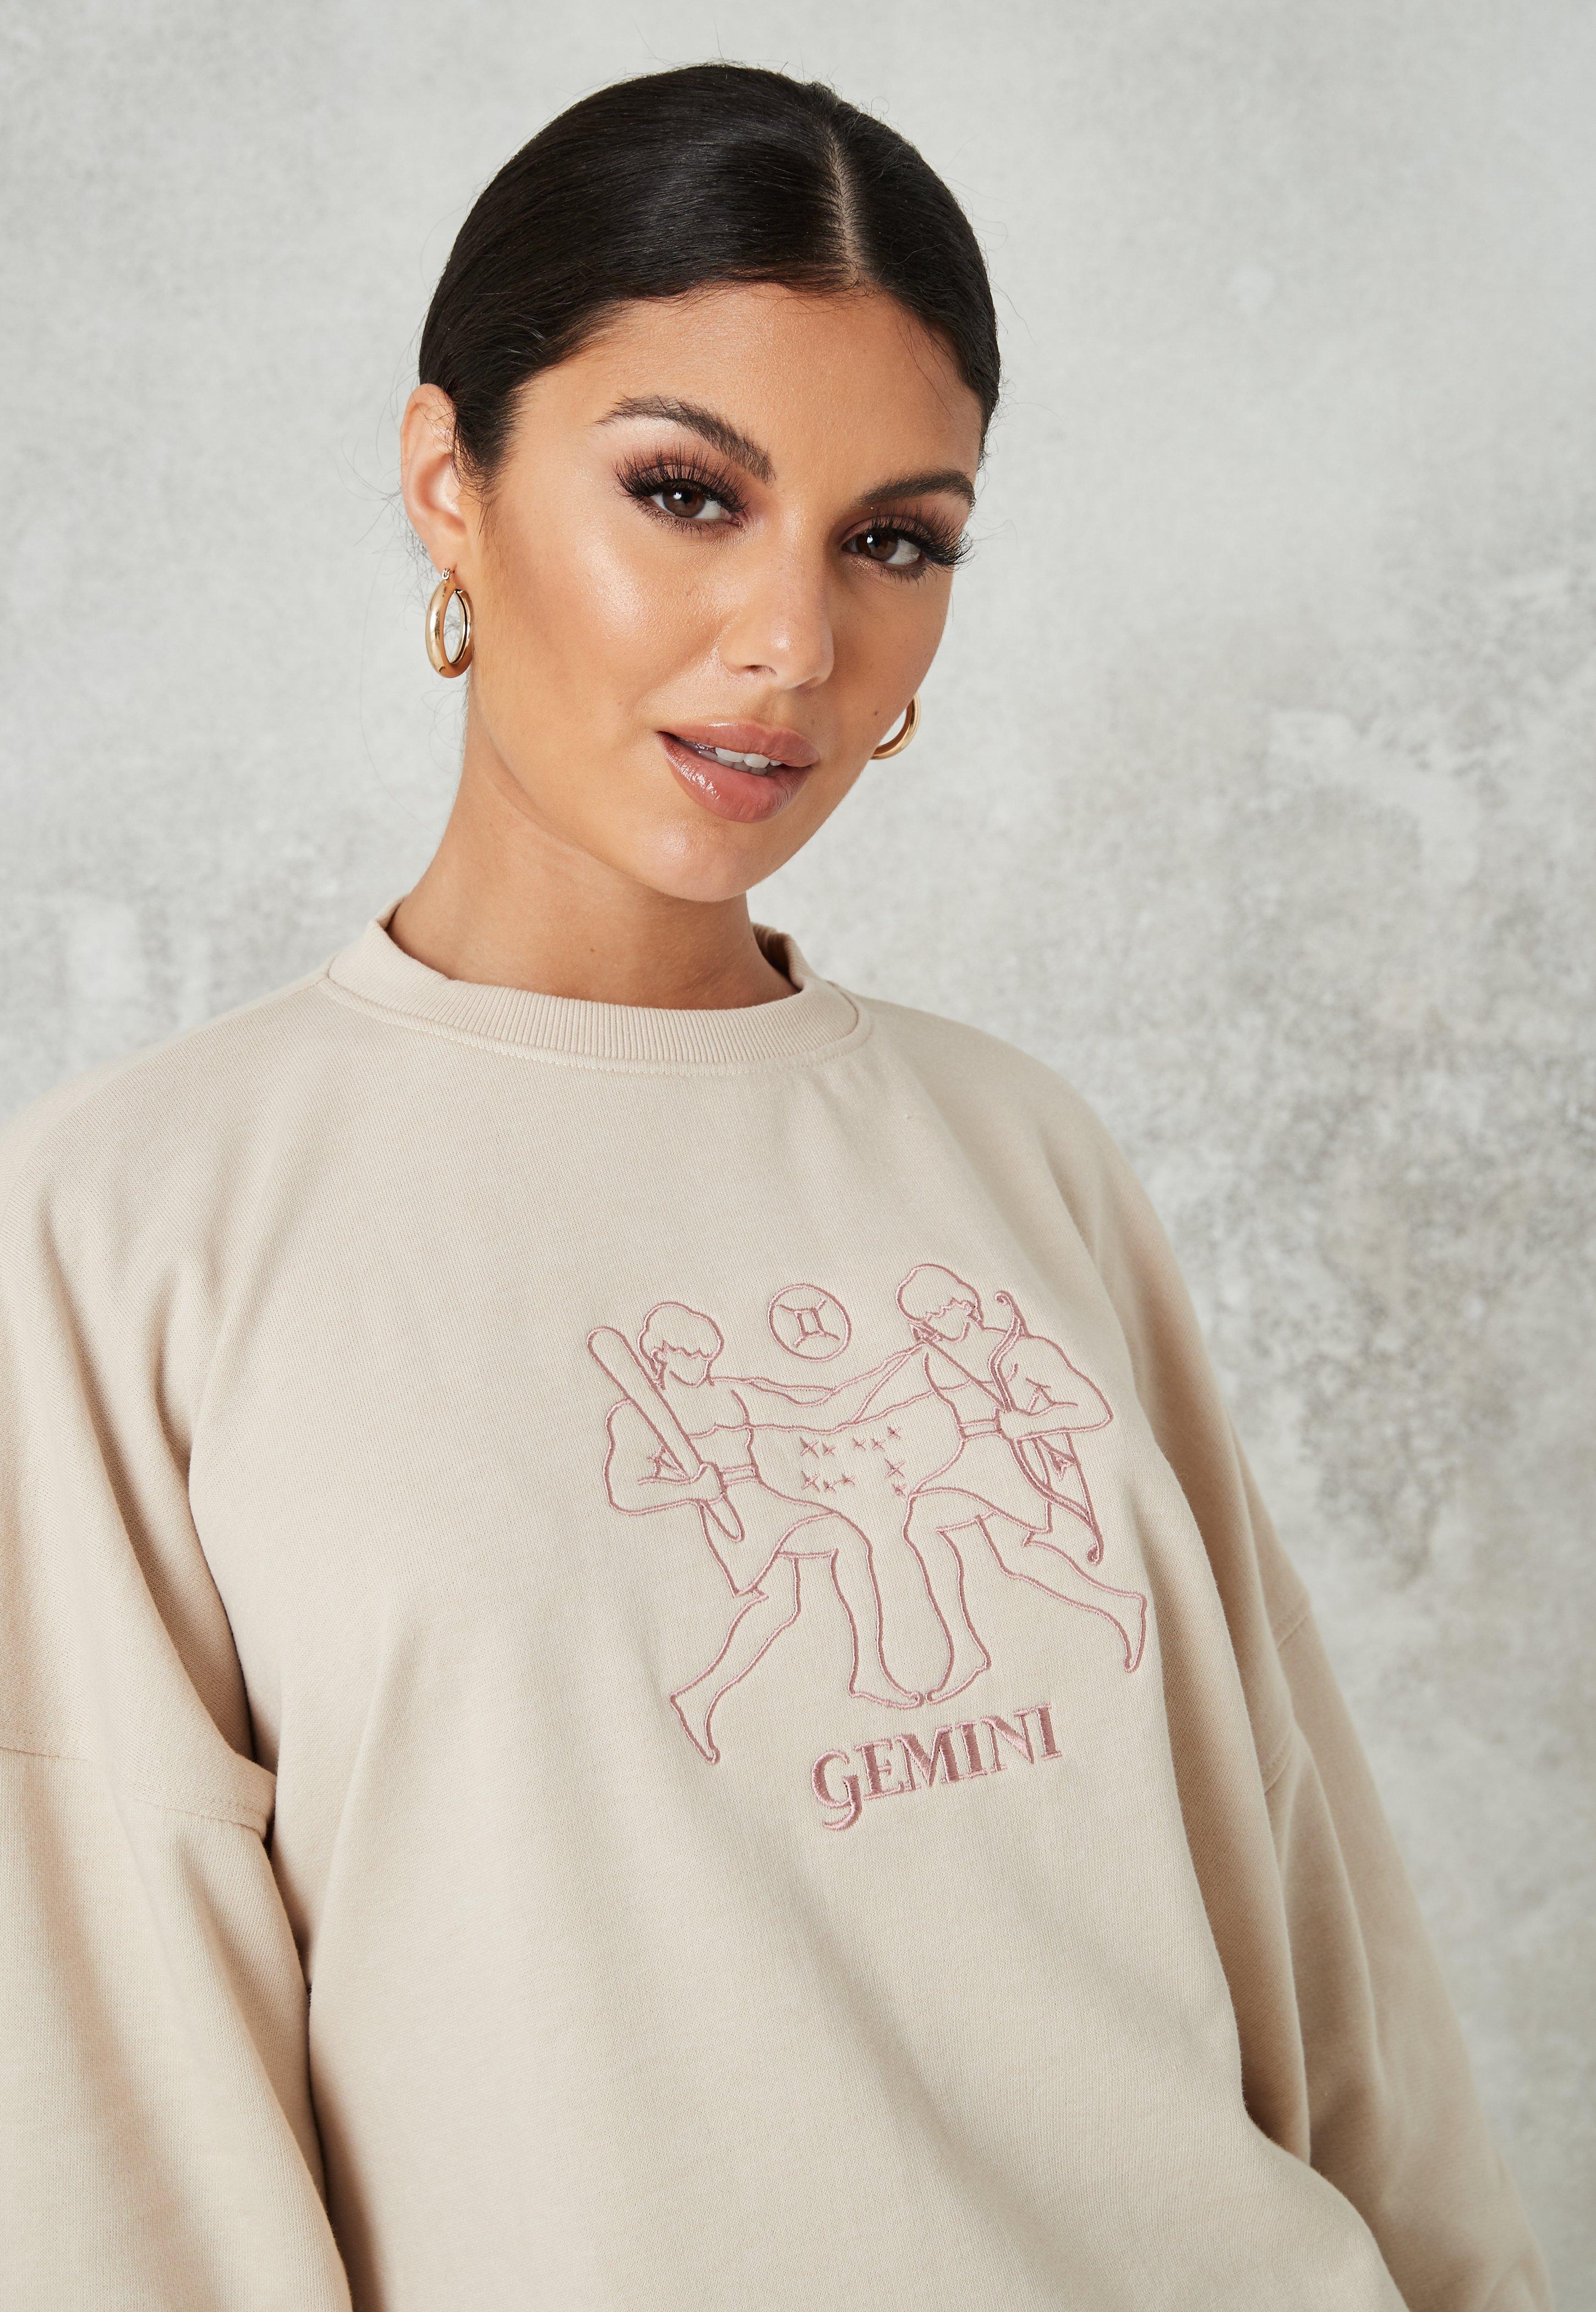 Missguided Synthetic Gemini Zodiac Oversized Sweatshirt in Cream (Natural)  - Lyst